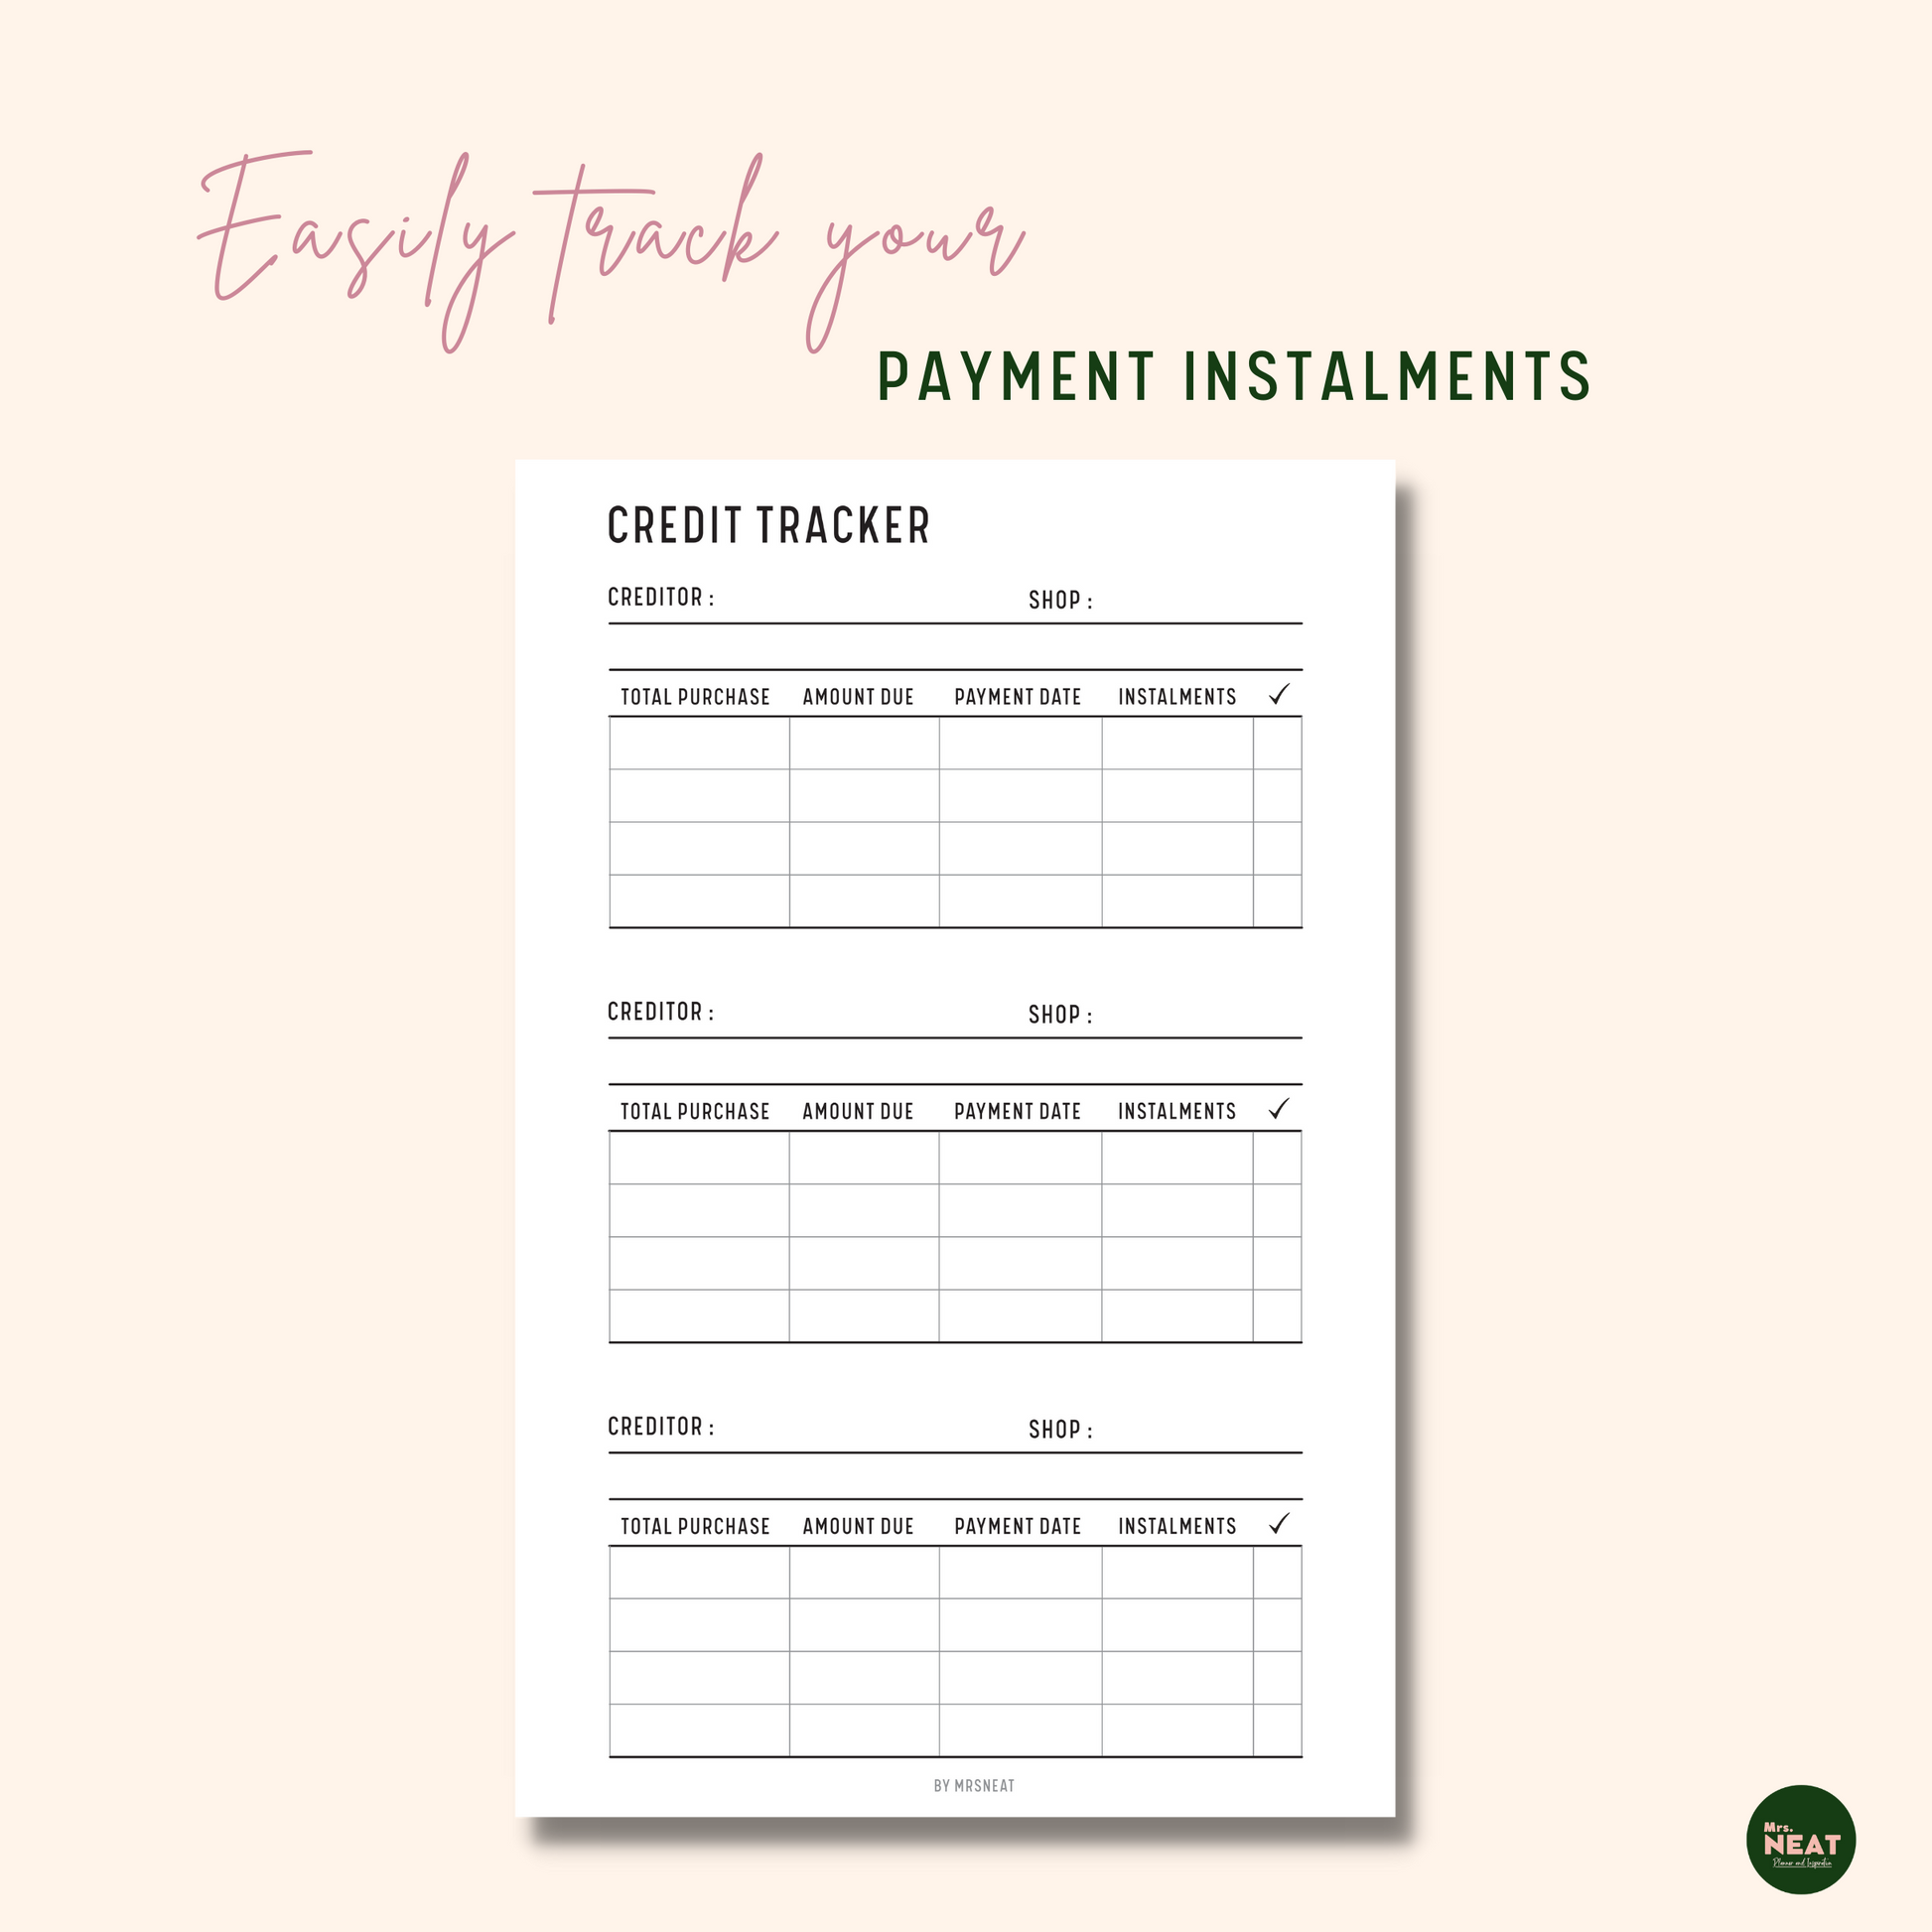 Credit Tracker Planner for easily track repayment installments